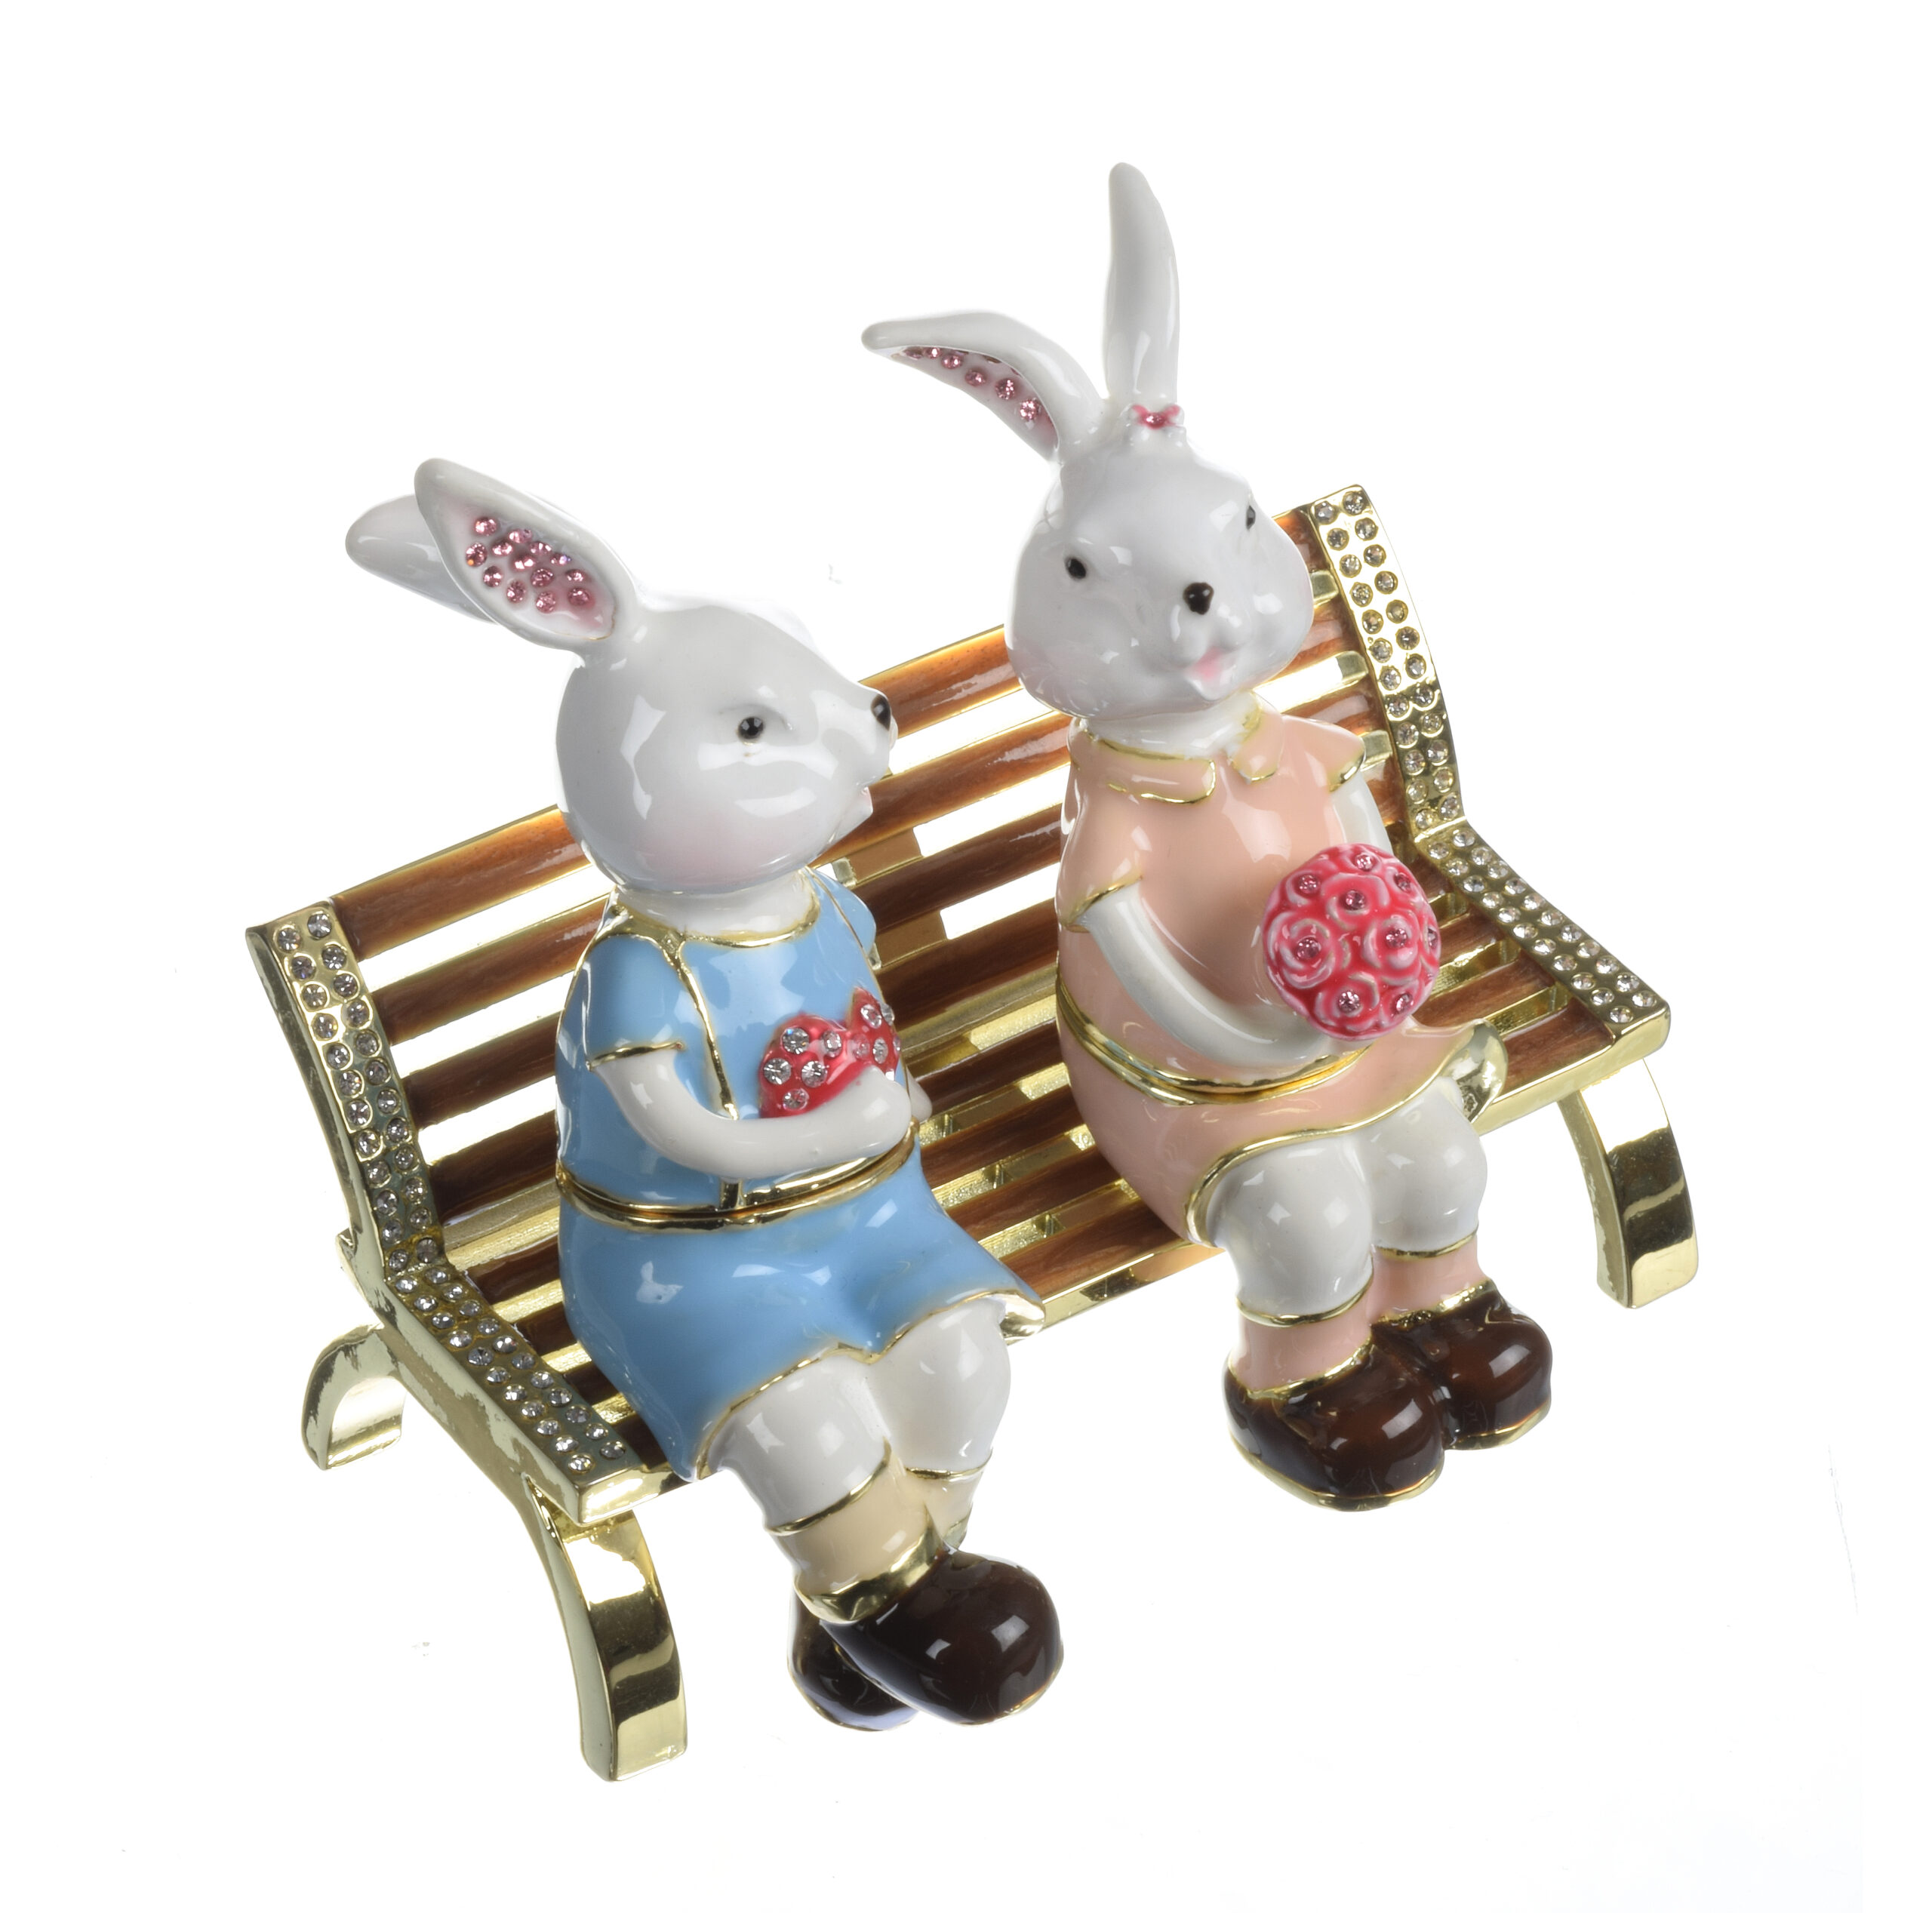 Bunnies Sitting on a Bench